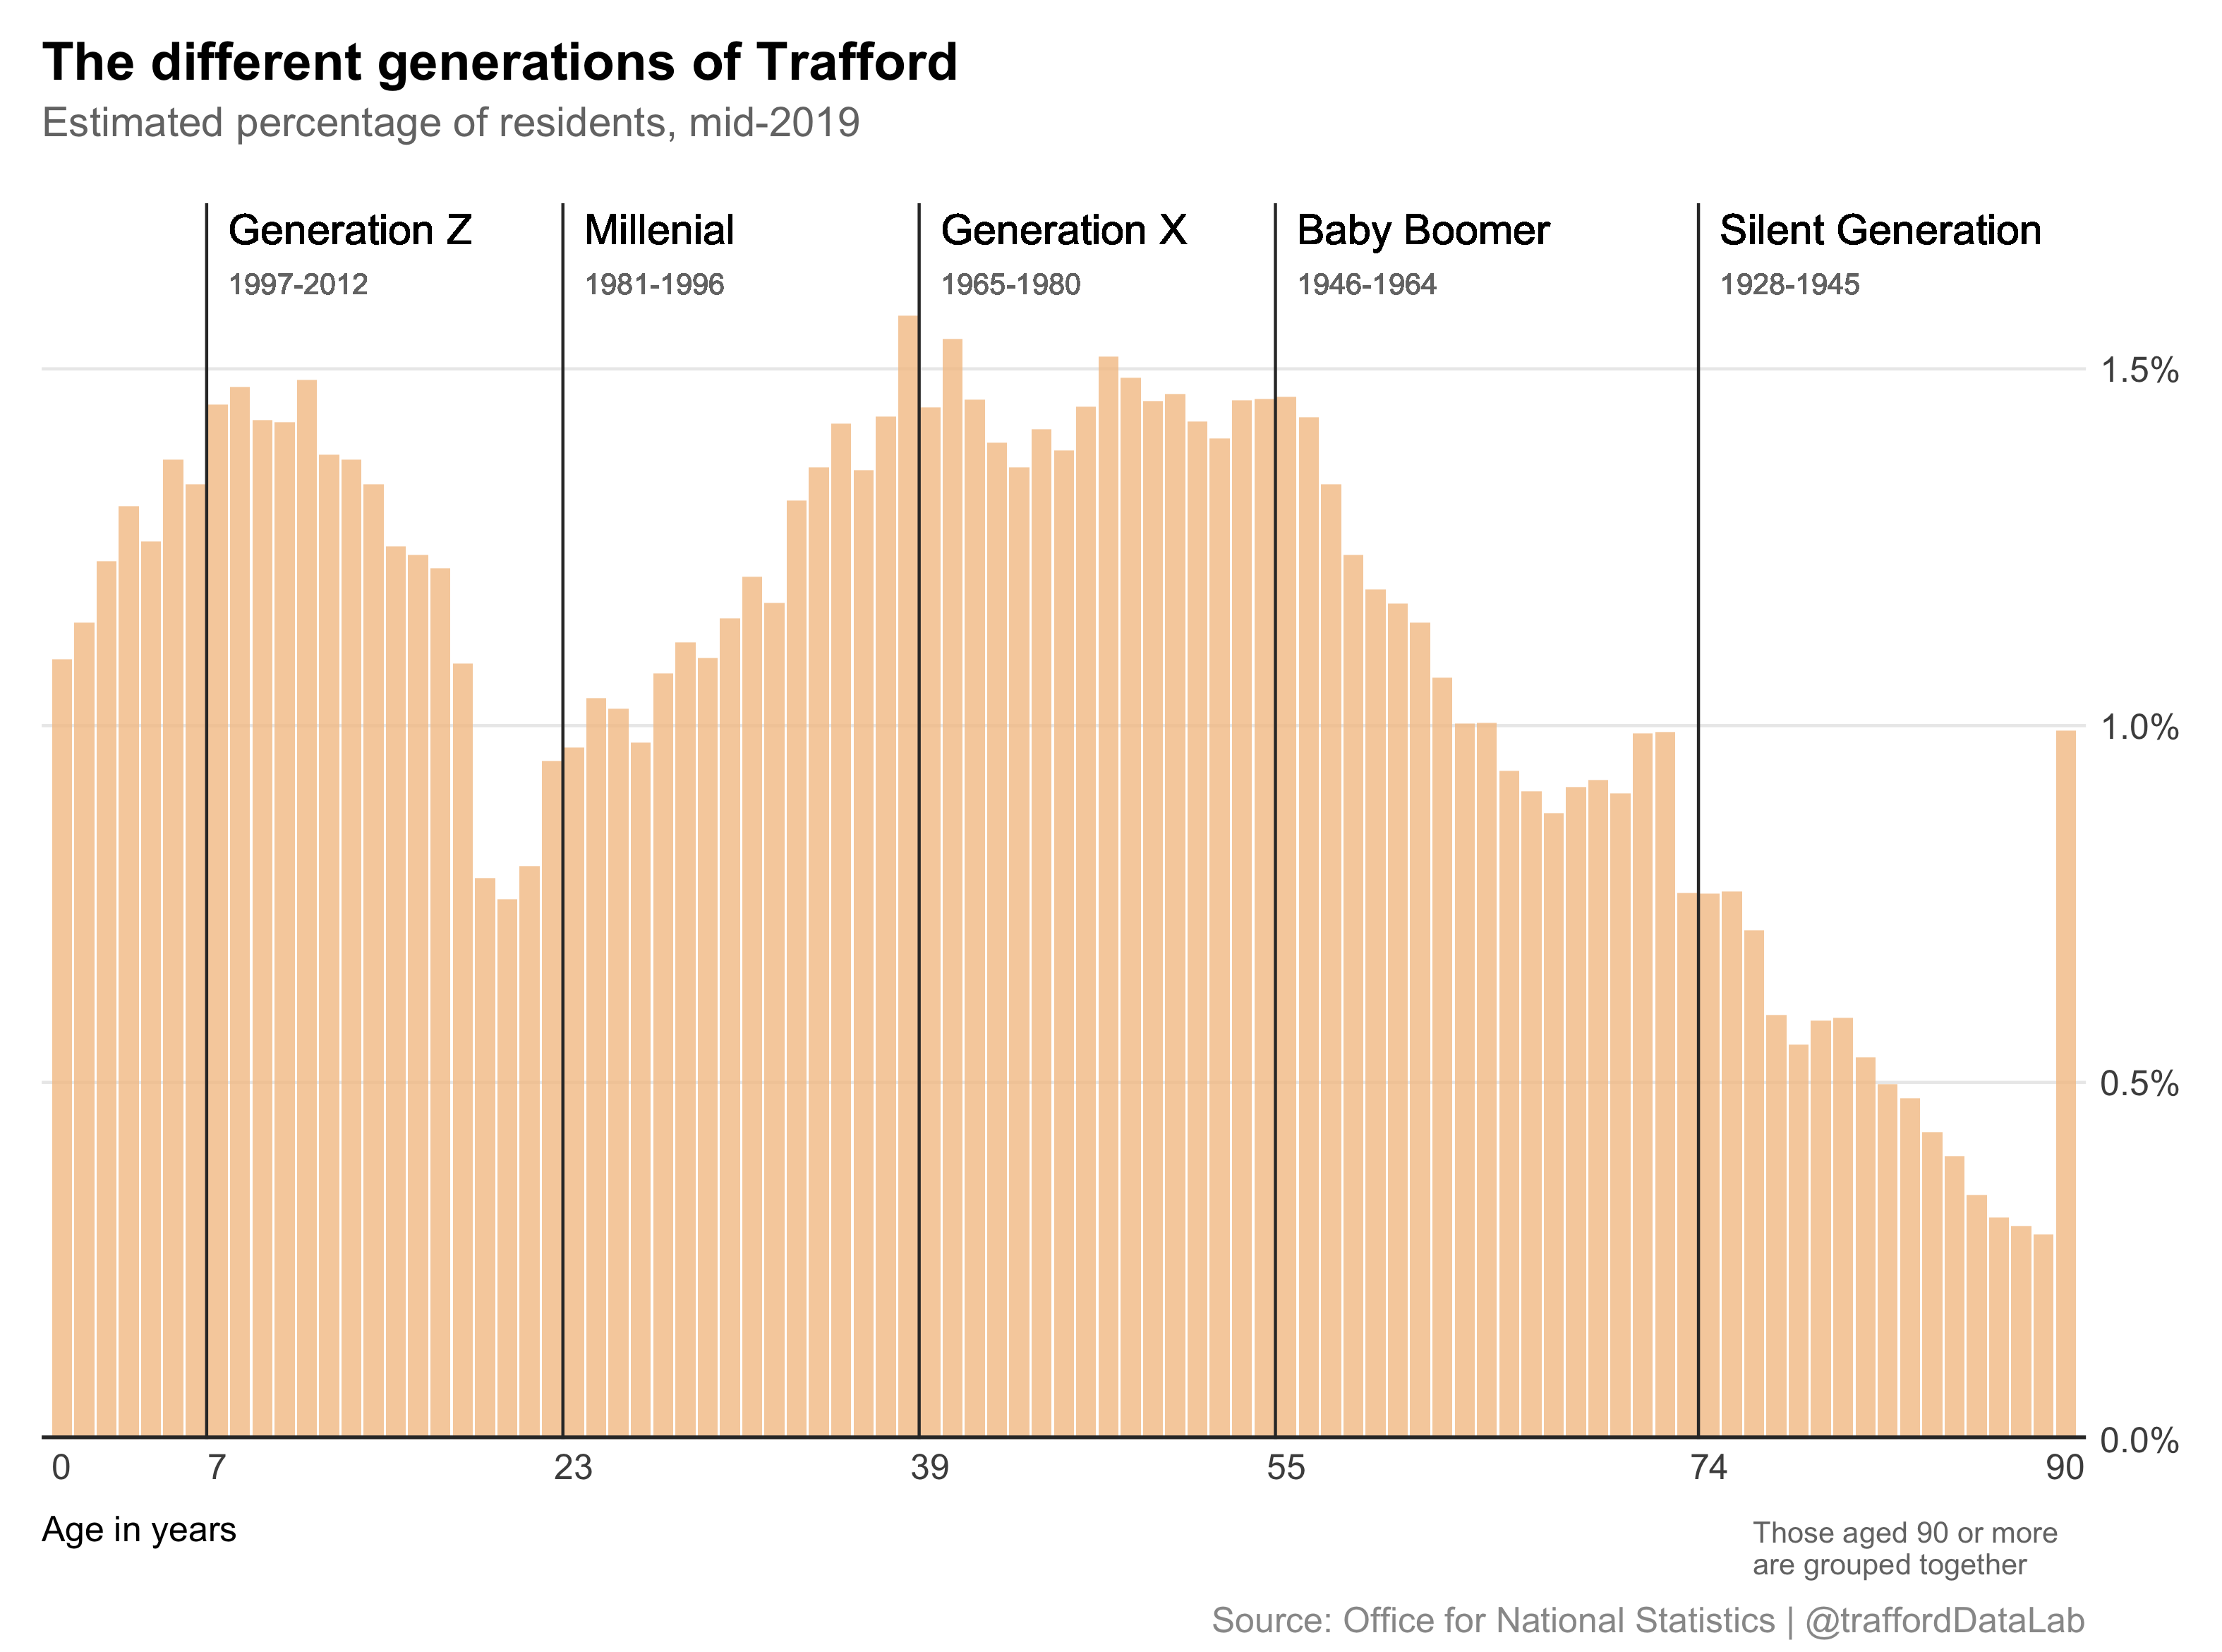 Estimated percentage of residents in Trafford by age and generation, mid-2019.